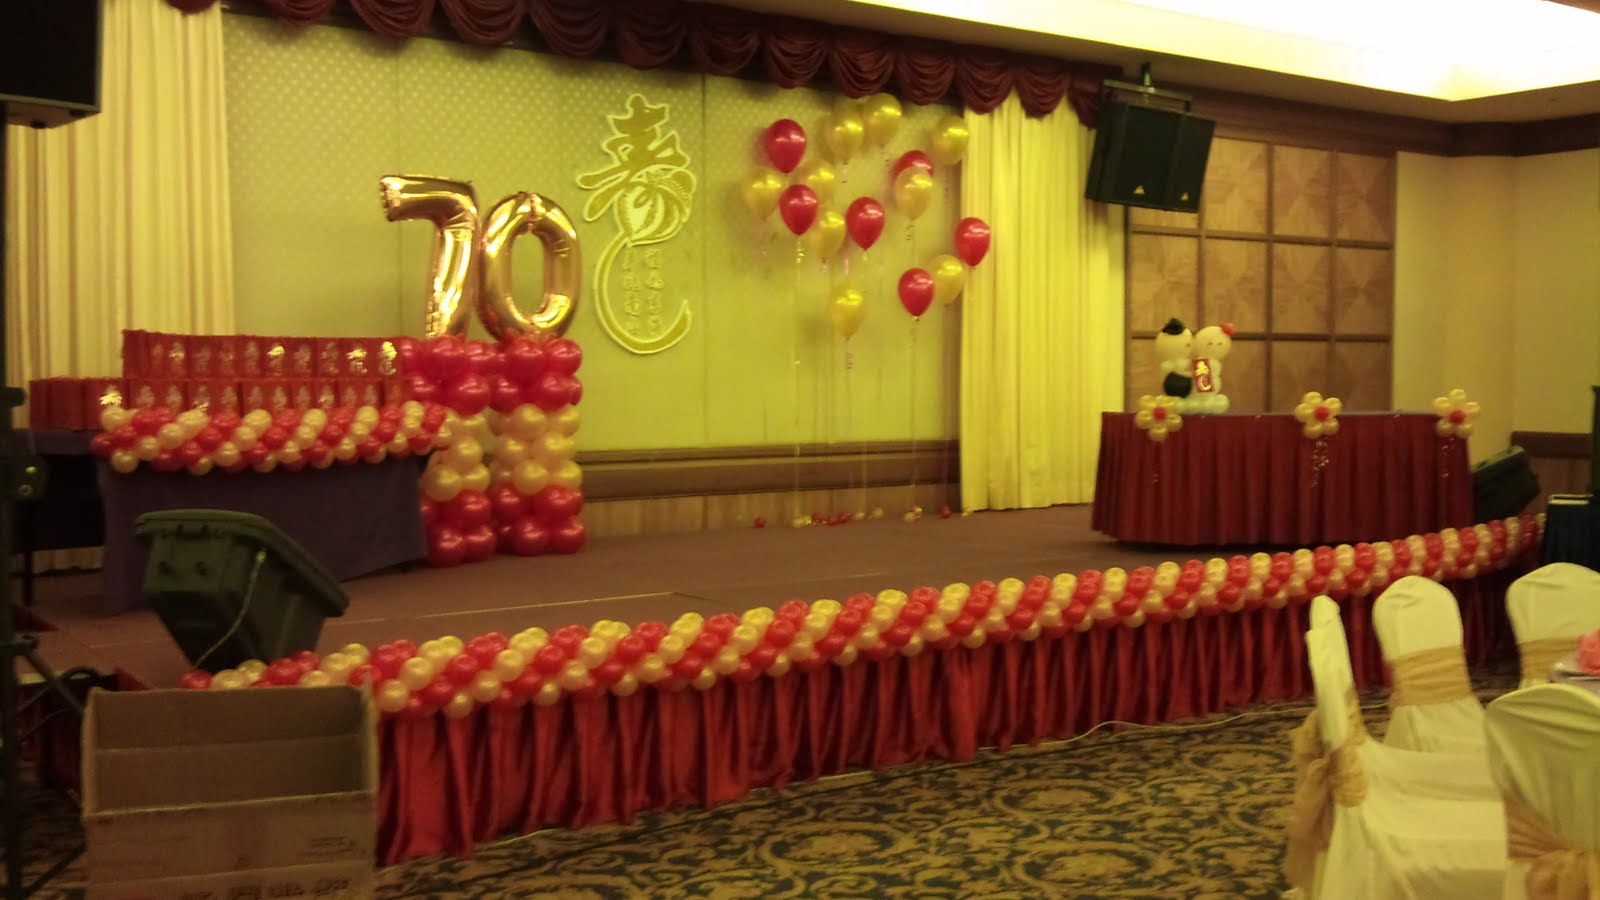 Balloon decorations for weddings  birthday parties 